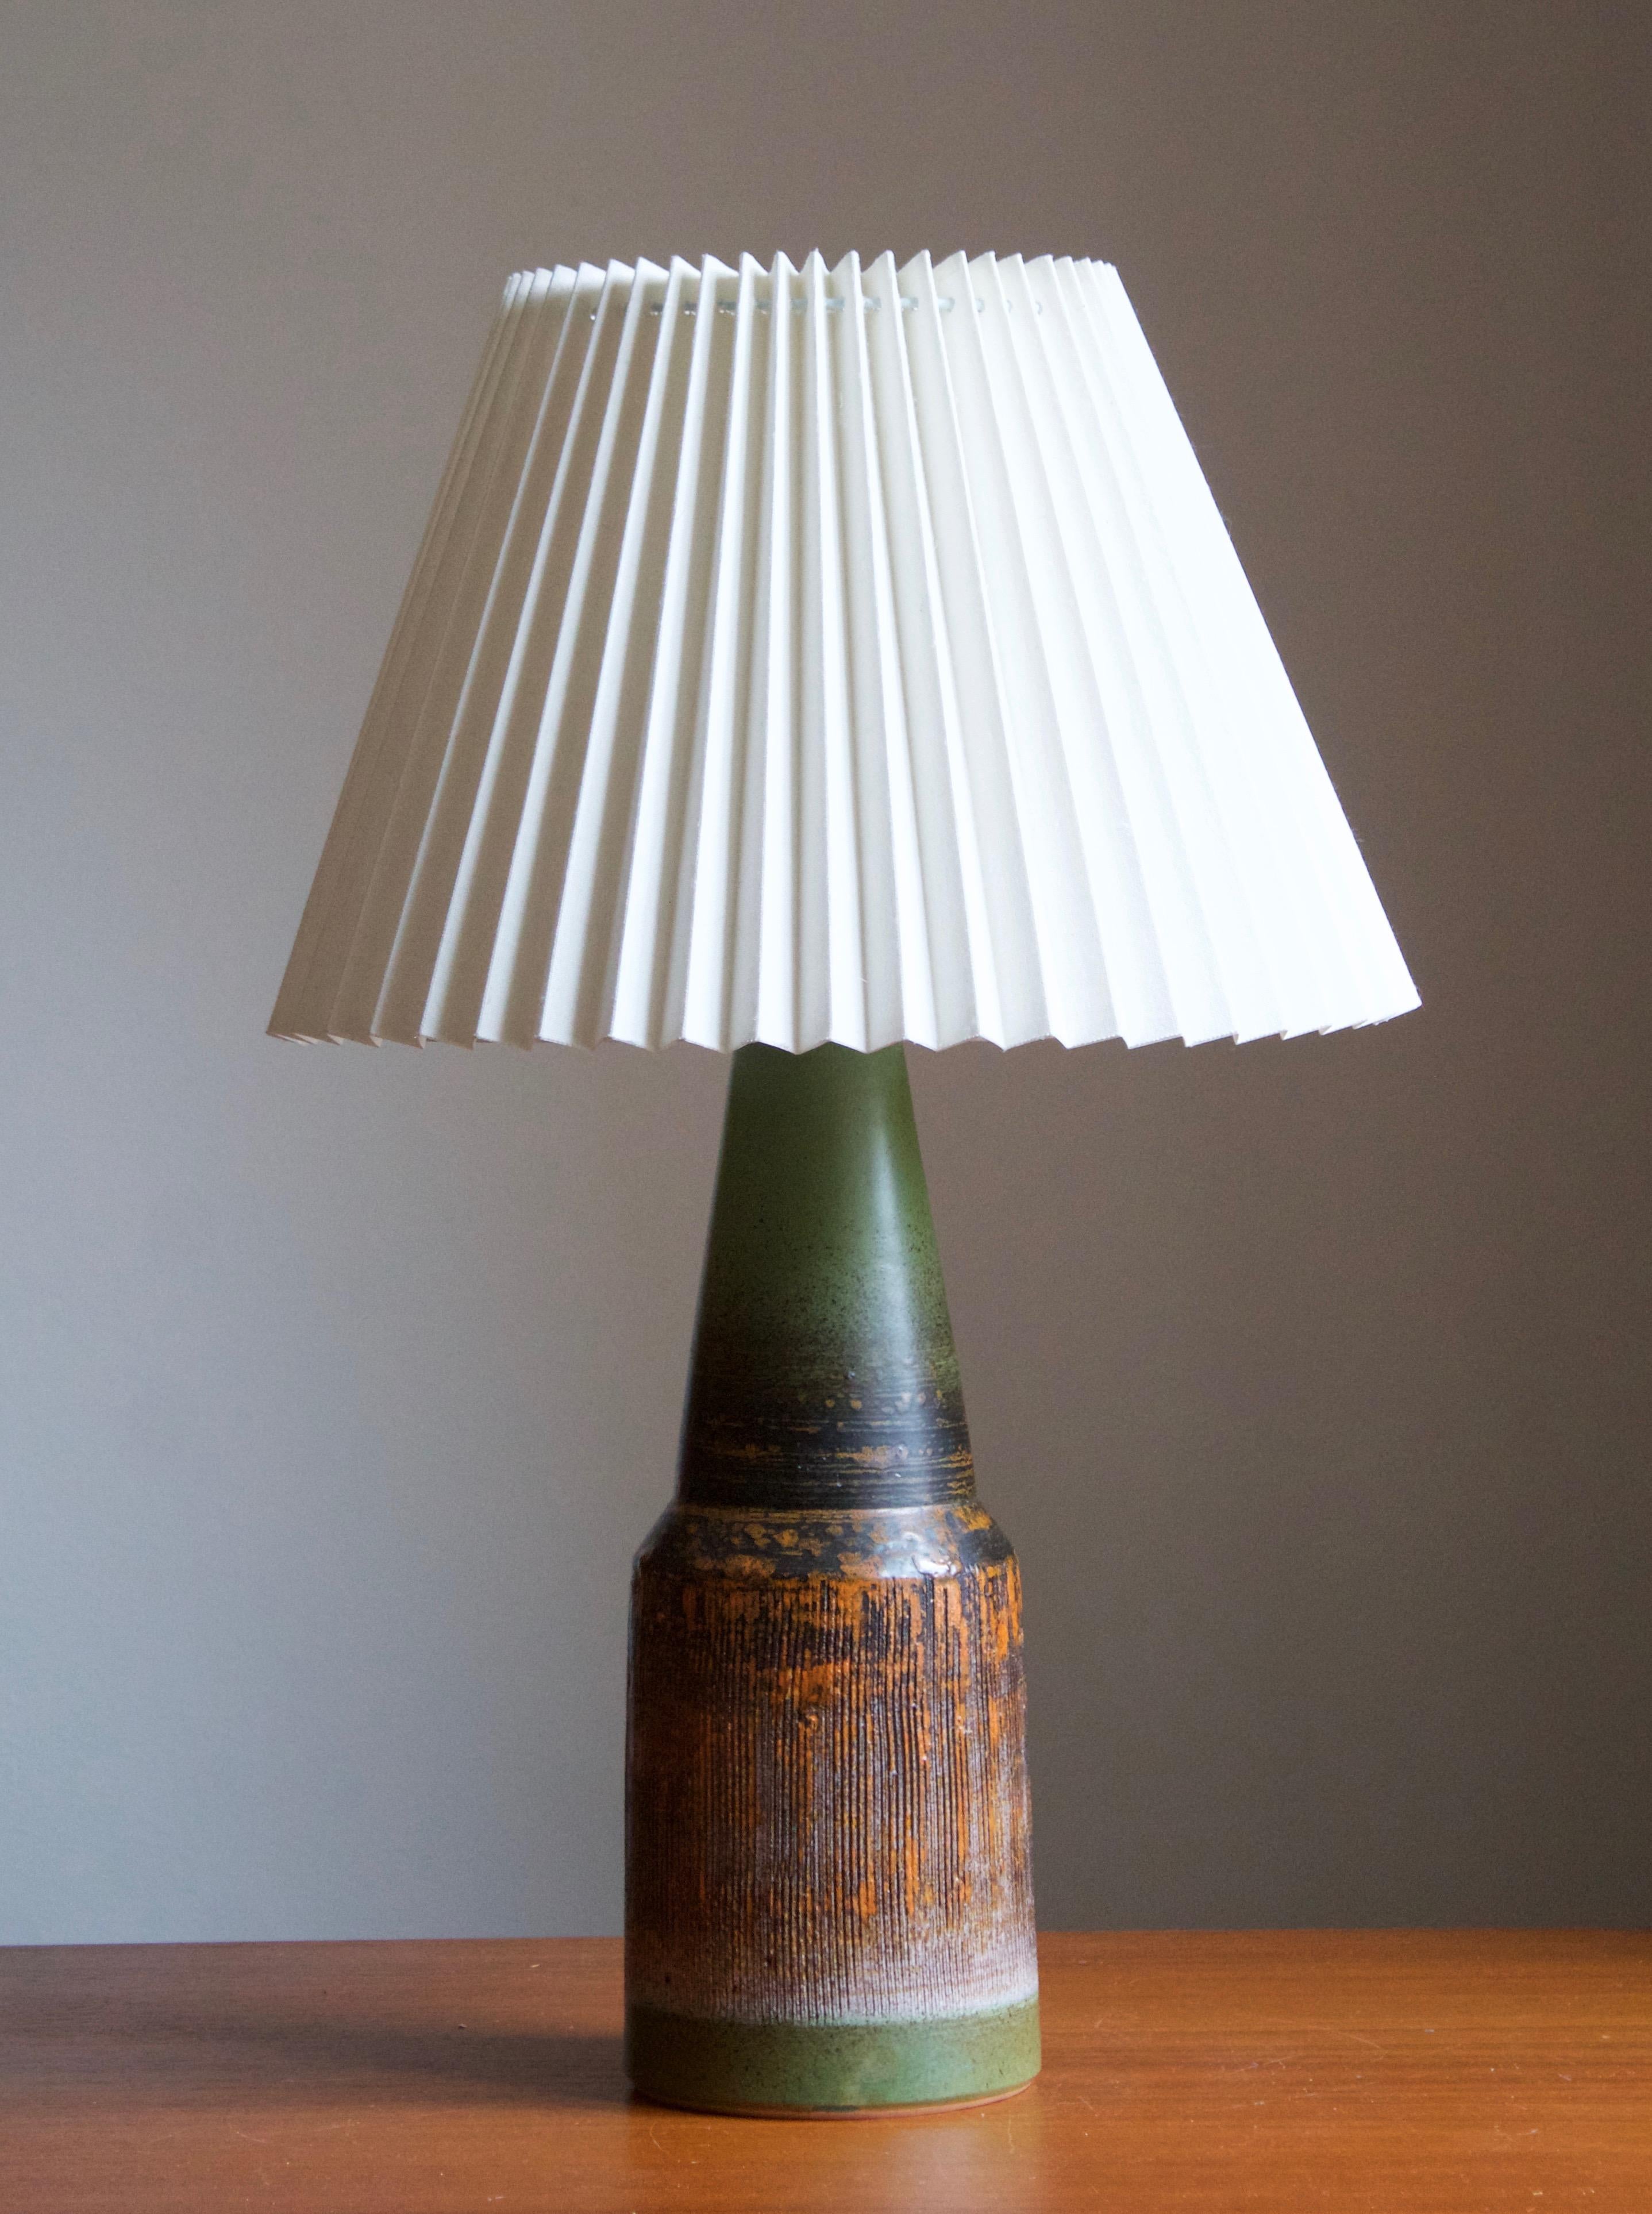 A sizable glazed stoneware table lamp. By Tilgmans Keramik, 1950s. Features a complex glaze combined with incised decor in a style iconic to the producer. Features green, orange and red tones.

Stated dimensions exclude lampshade. Height includes